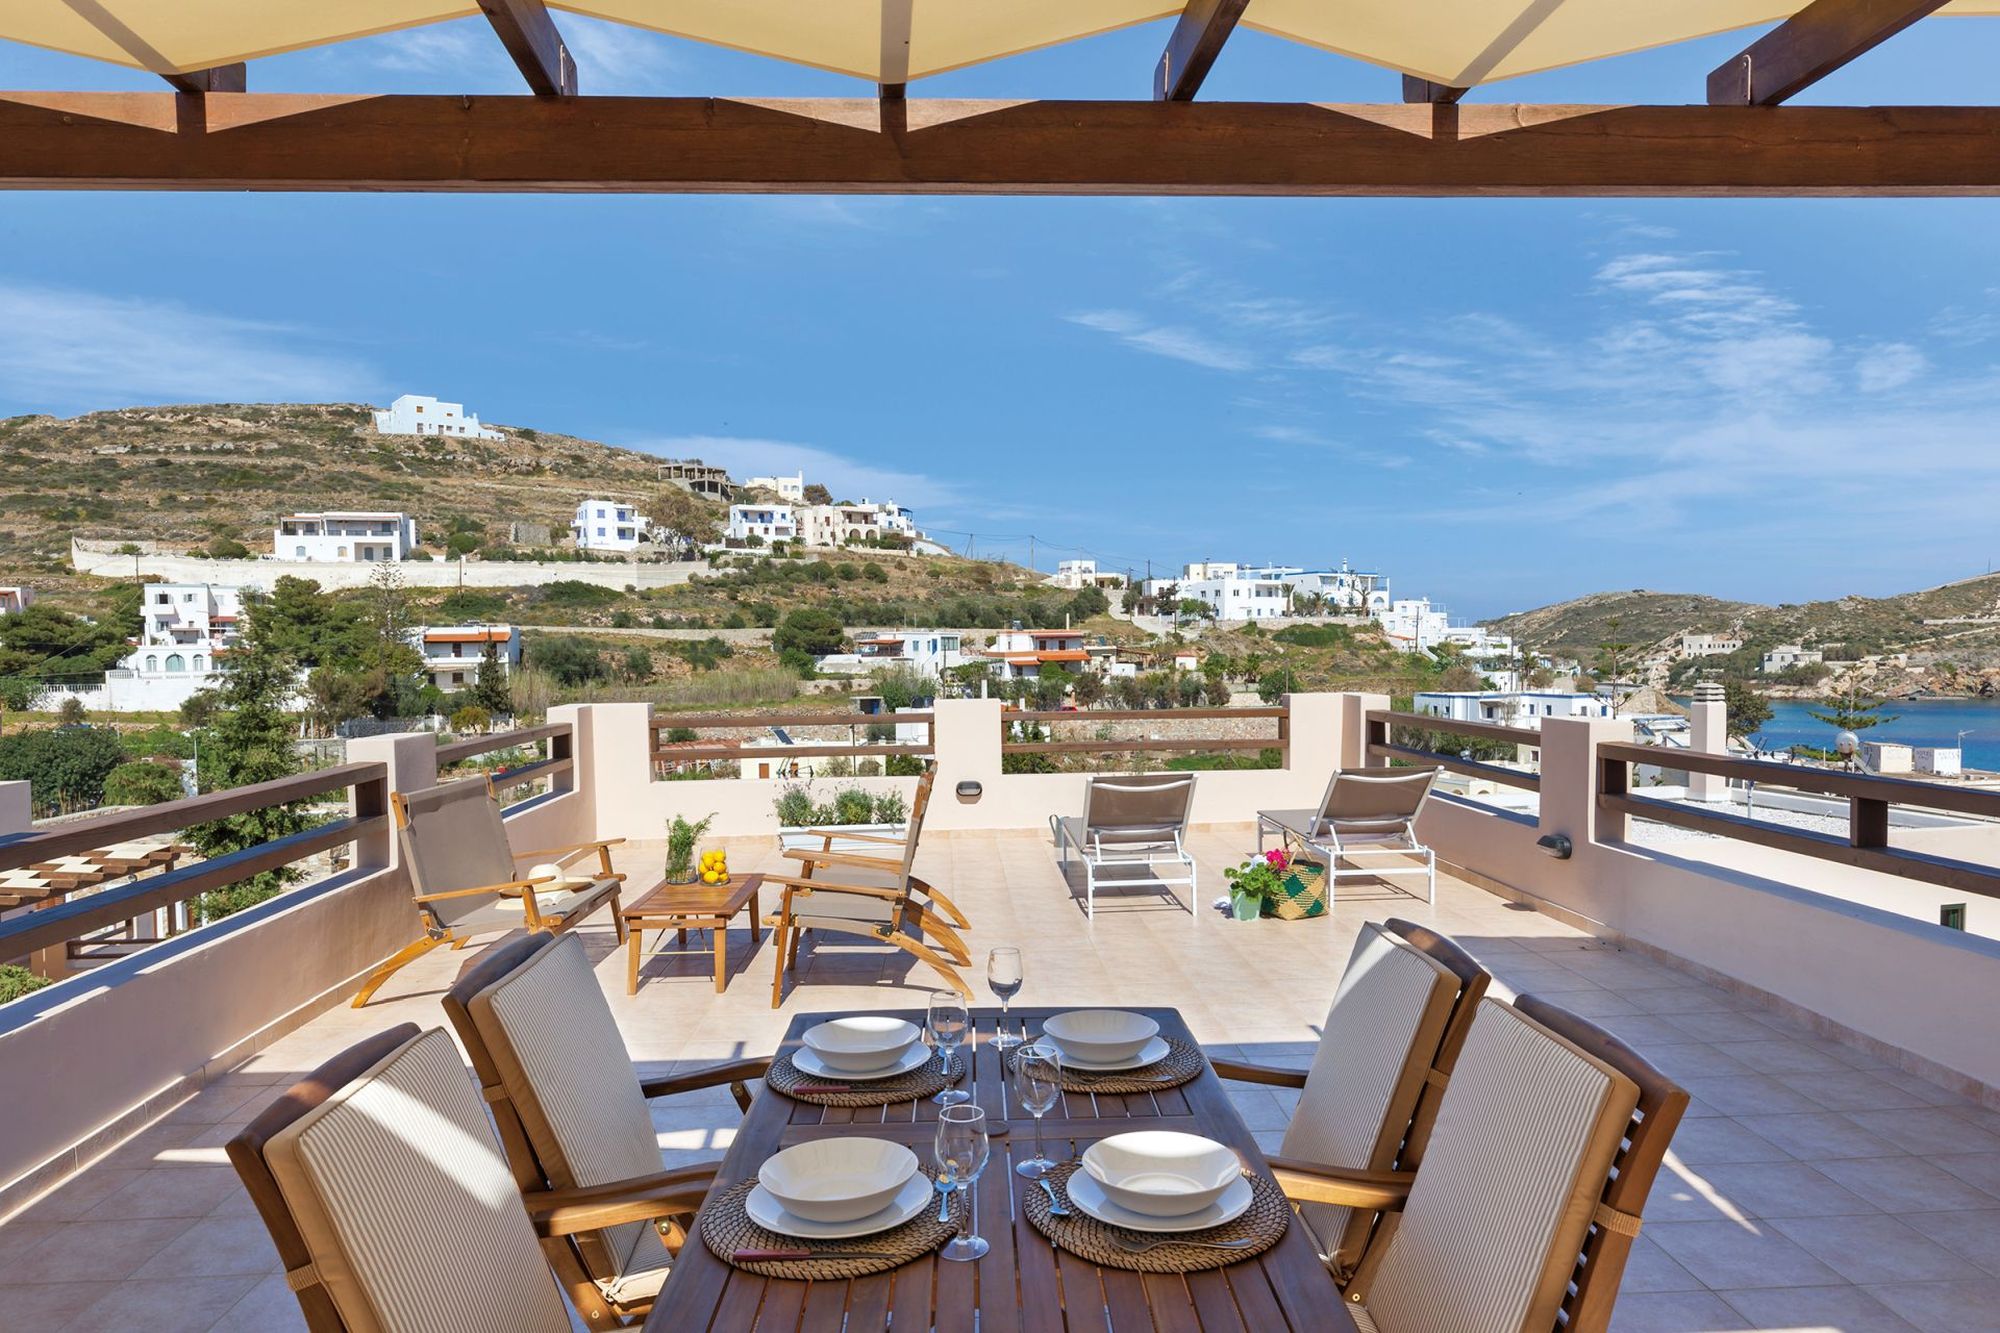 Spacious sea view veranda with pergola fully furnished with a dining table, a lounge and two sunbeds.